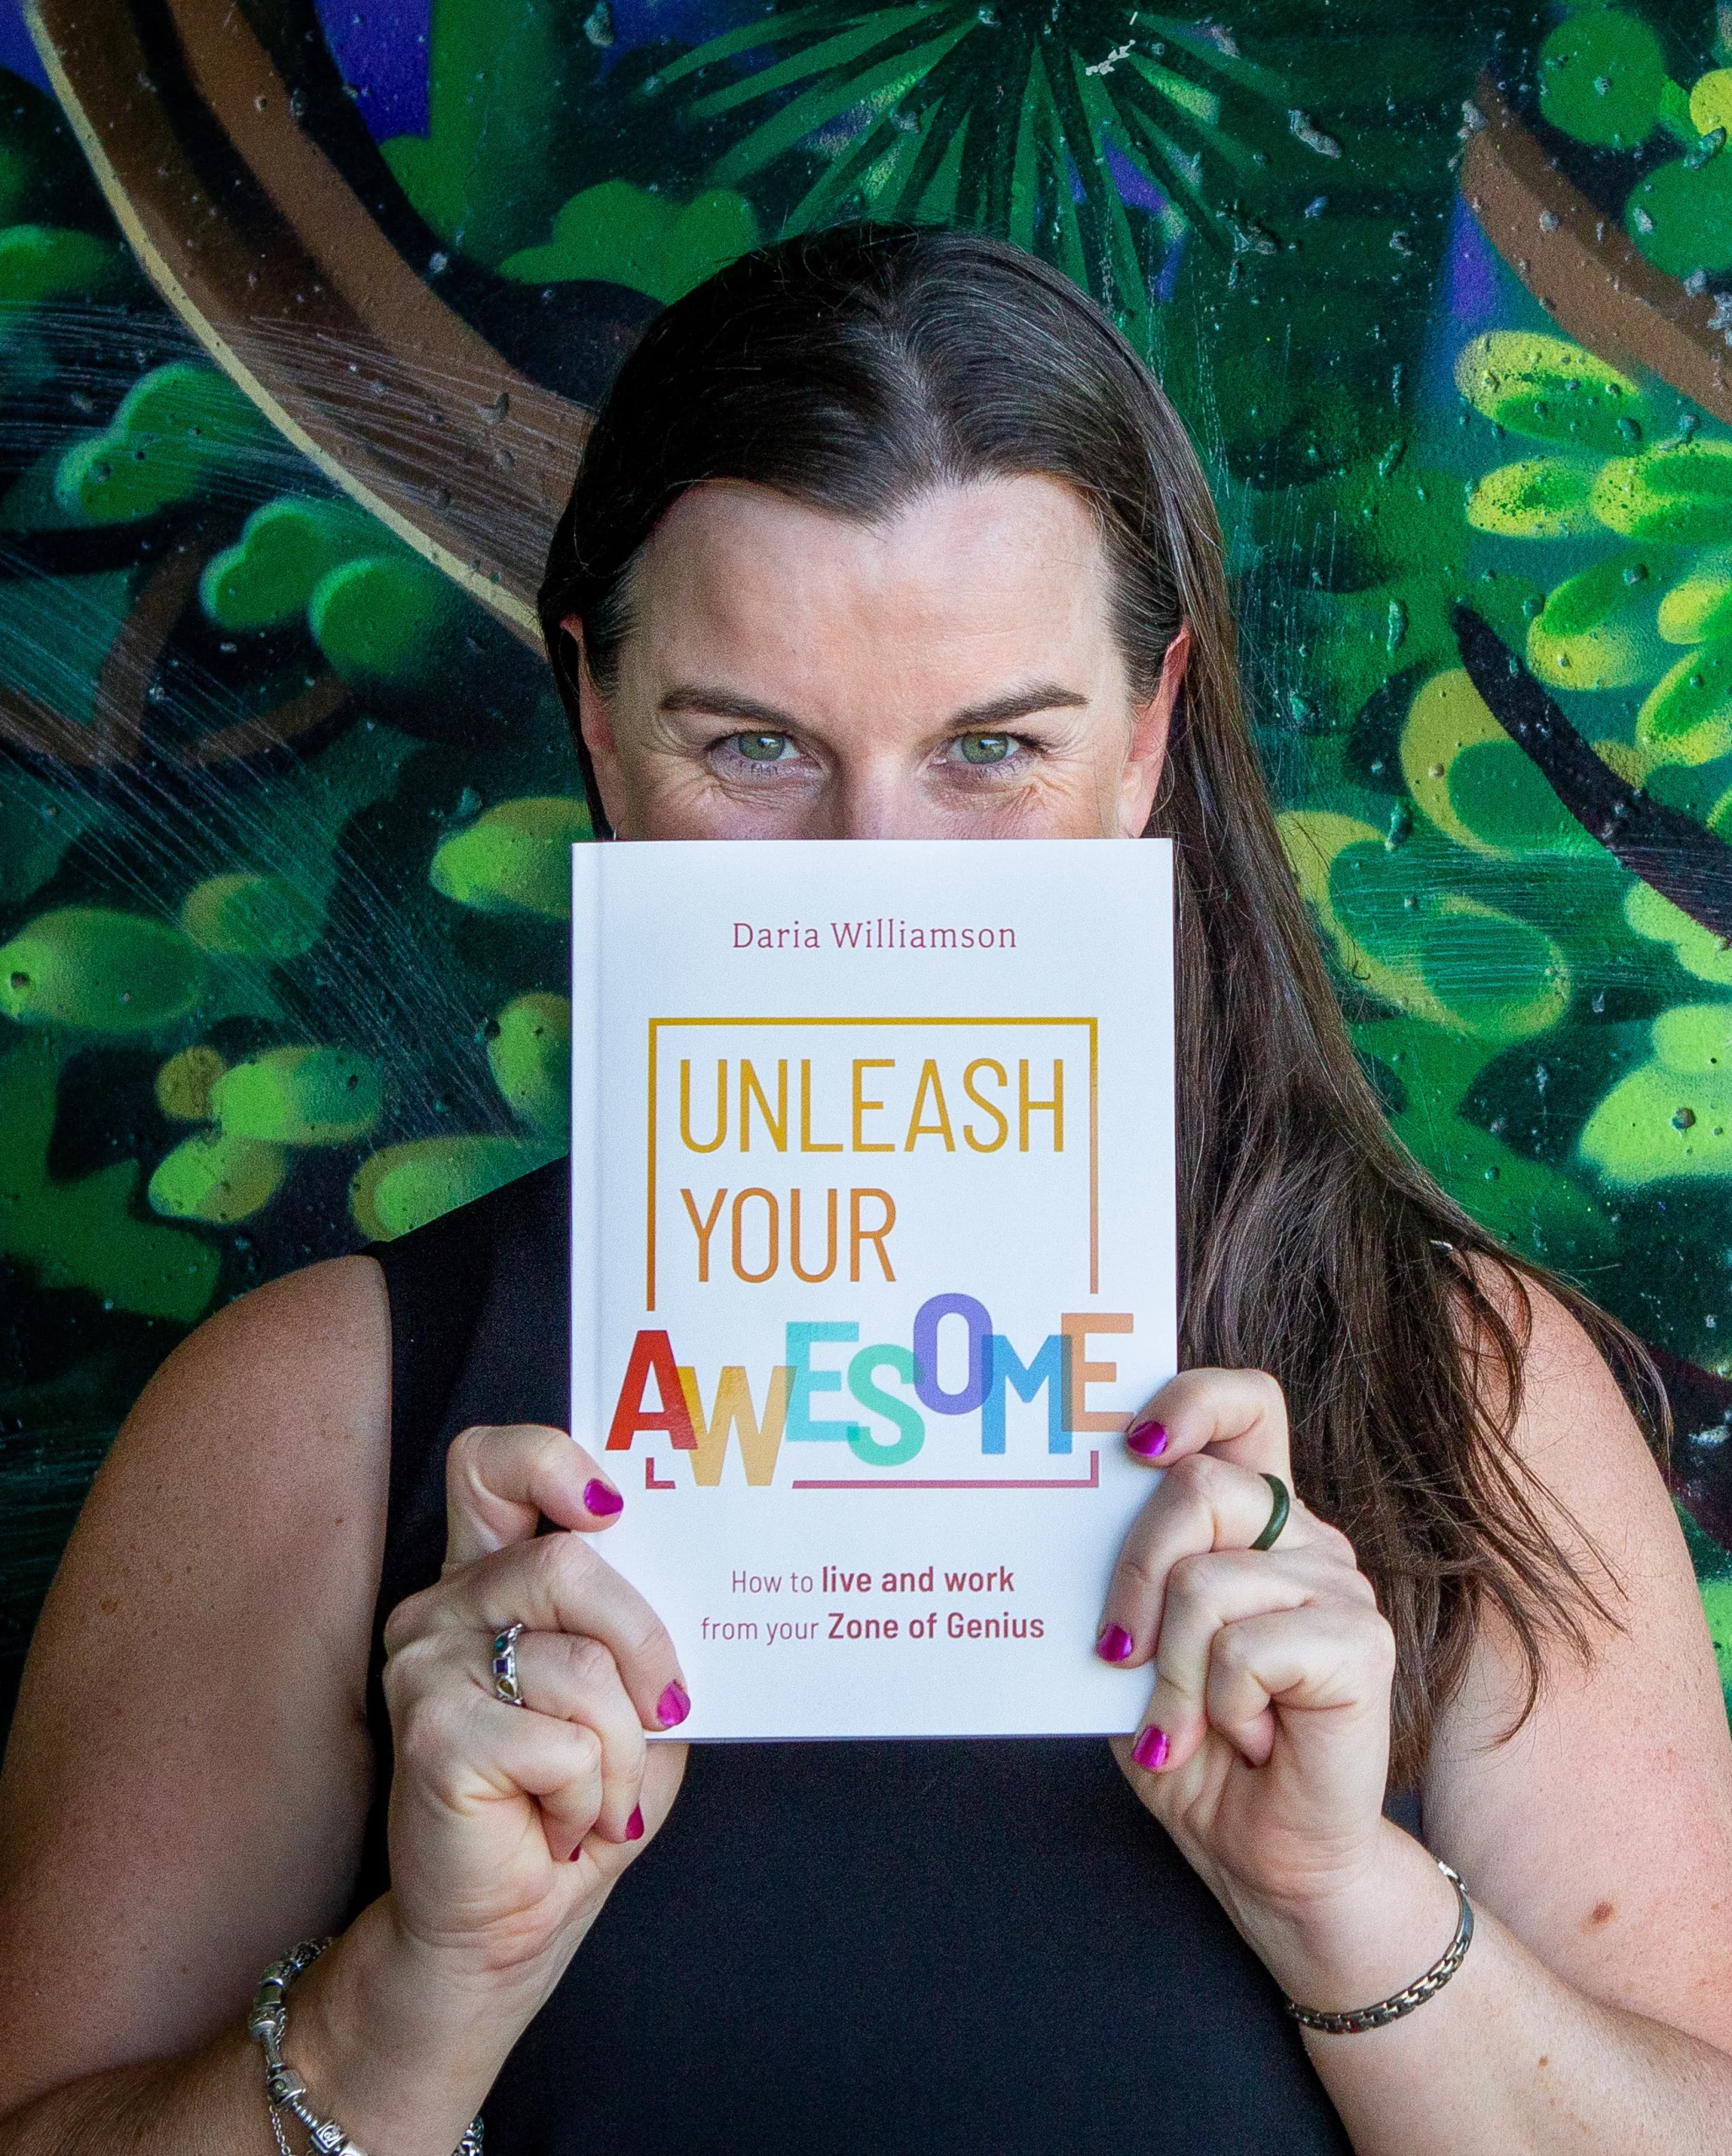 A dark-haired woman stands in front of a concrete wall that has been painted to resemble a jungle. She is holding a copy of the book 'Unleash Your Awesome' in front of her face, so that only her eyes are peeking out - she appears to be smiling broadly.